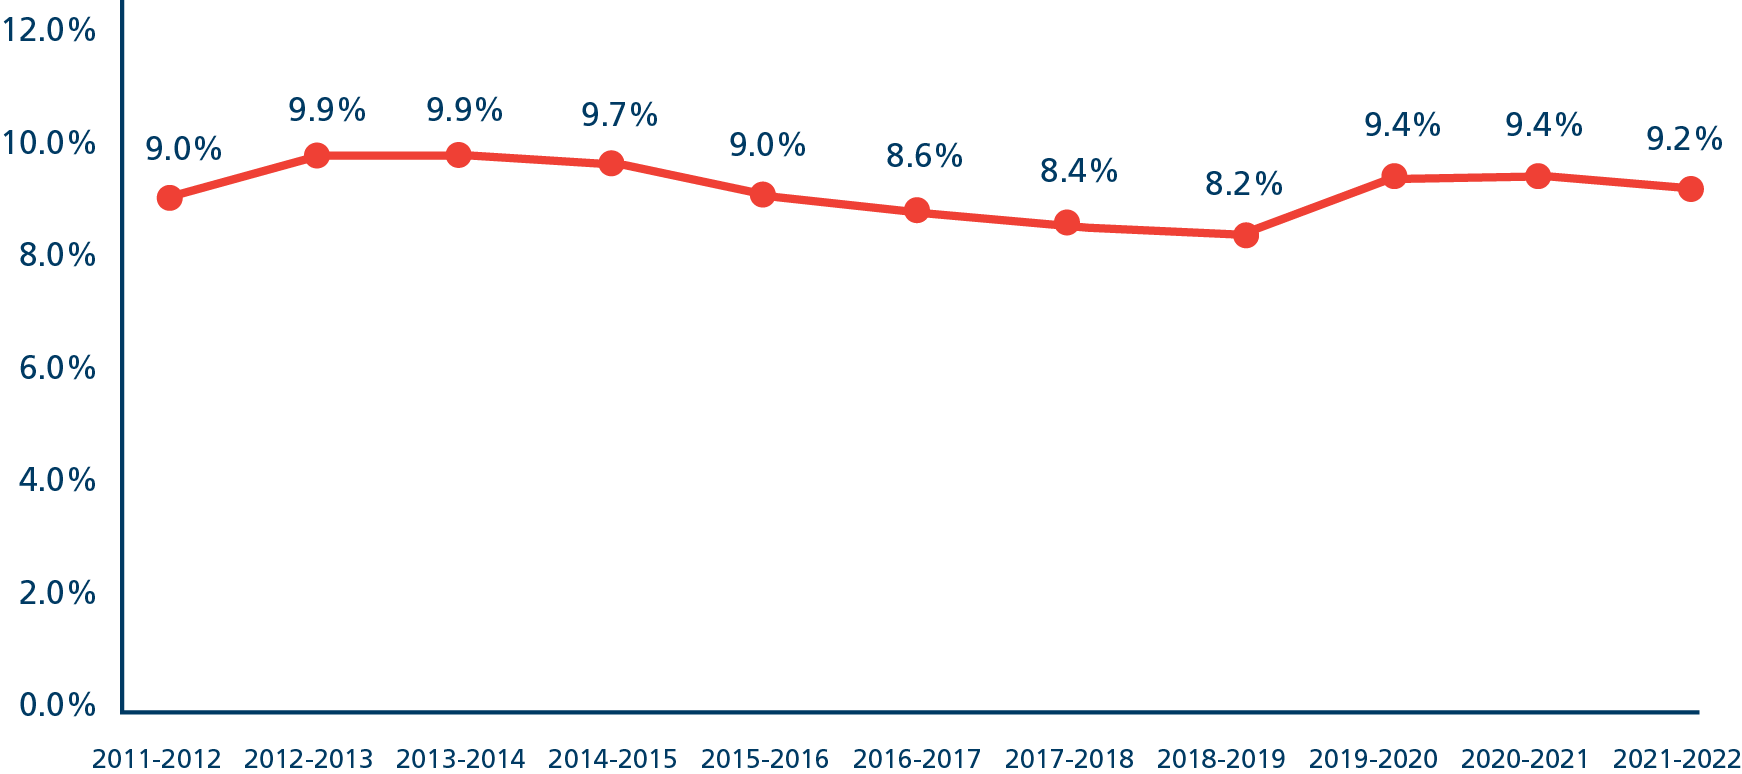 A line graph depicting incarcerated Black individuals as a proportion of the total in-custody population by year. 2011-2012 = 9.0%; 2012-2013 = 9.9%; 2013-2014 = 9.9%; 2014-2015 = 9.7%; 2015-2016 = 9.0%; 2016-2017 = 8.6%; 2017-2018 = 8.4%; 2018-2019 = 8.2%; 2019-2020 = 9.4%; 2020-2021 = 9.4%; 2021-2022 = 9.2%